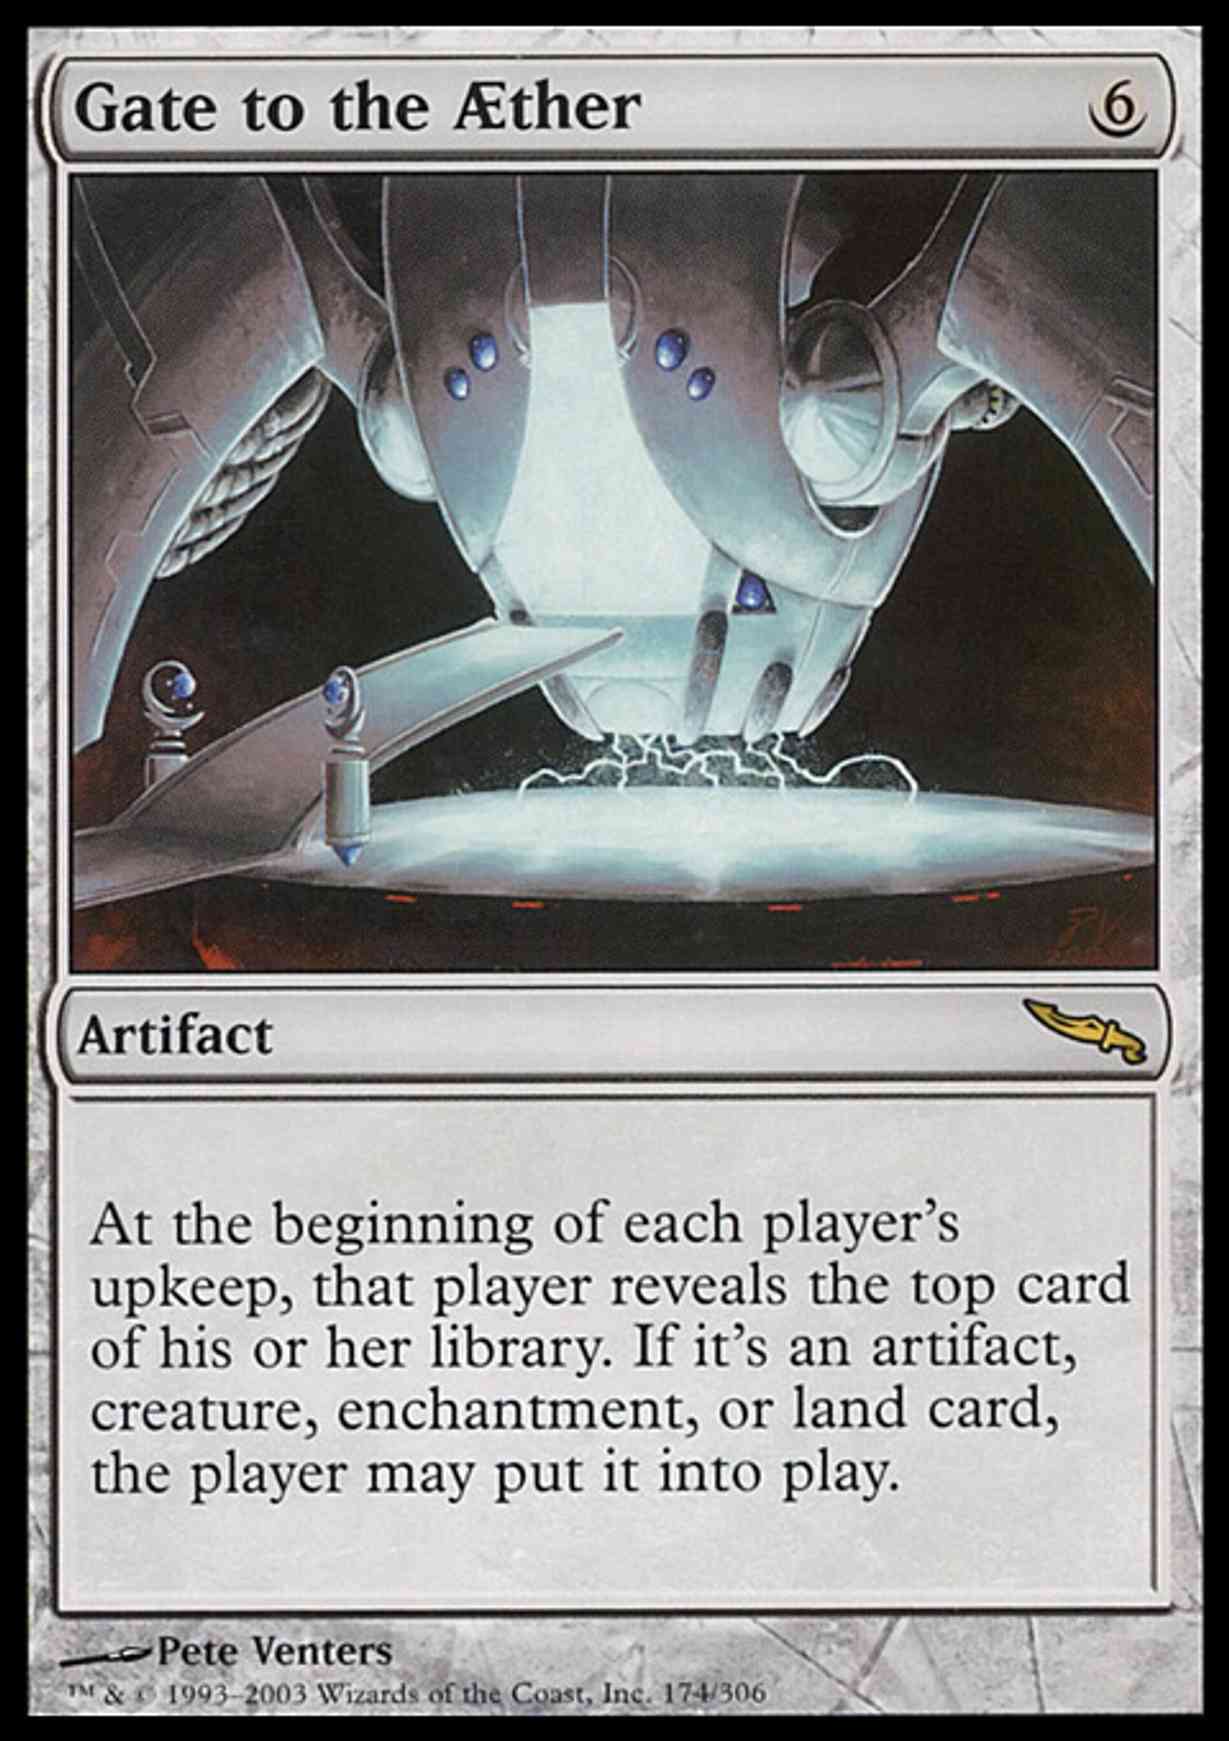 Gate to the AEther magic card front